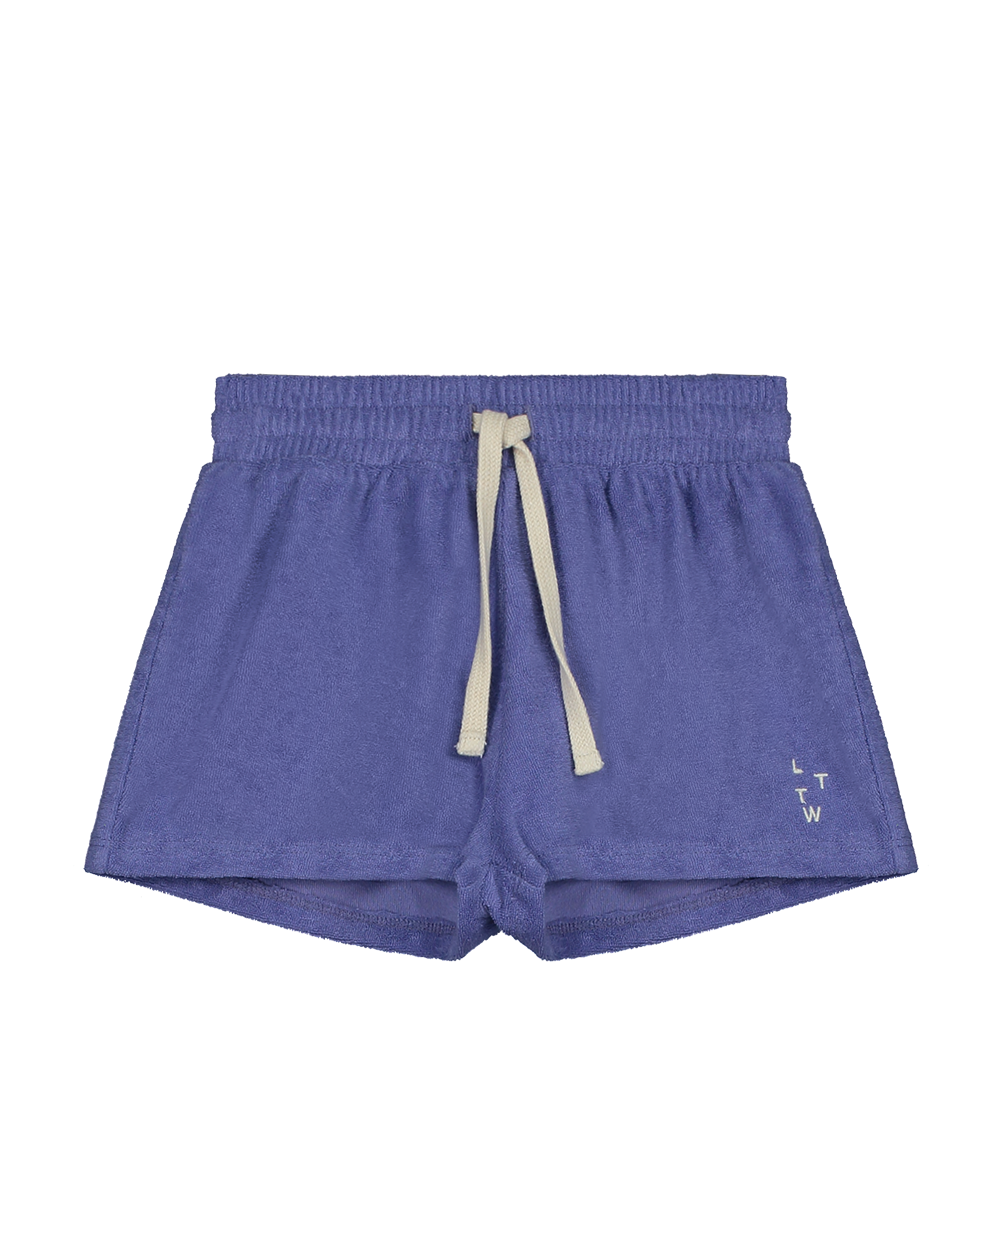 [LETTER TO THE WORLD] AMSTERDAM SHORTS / LOTUS